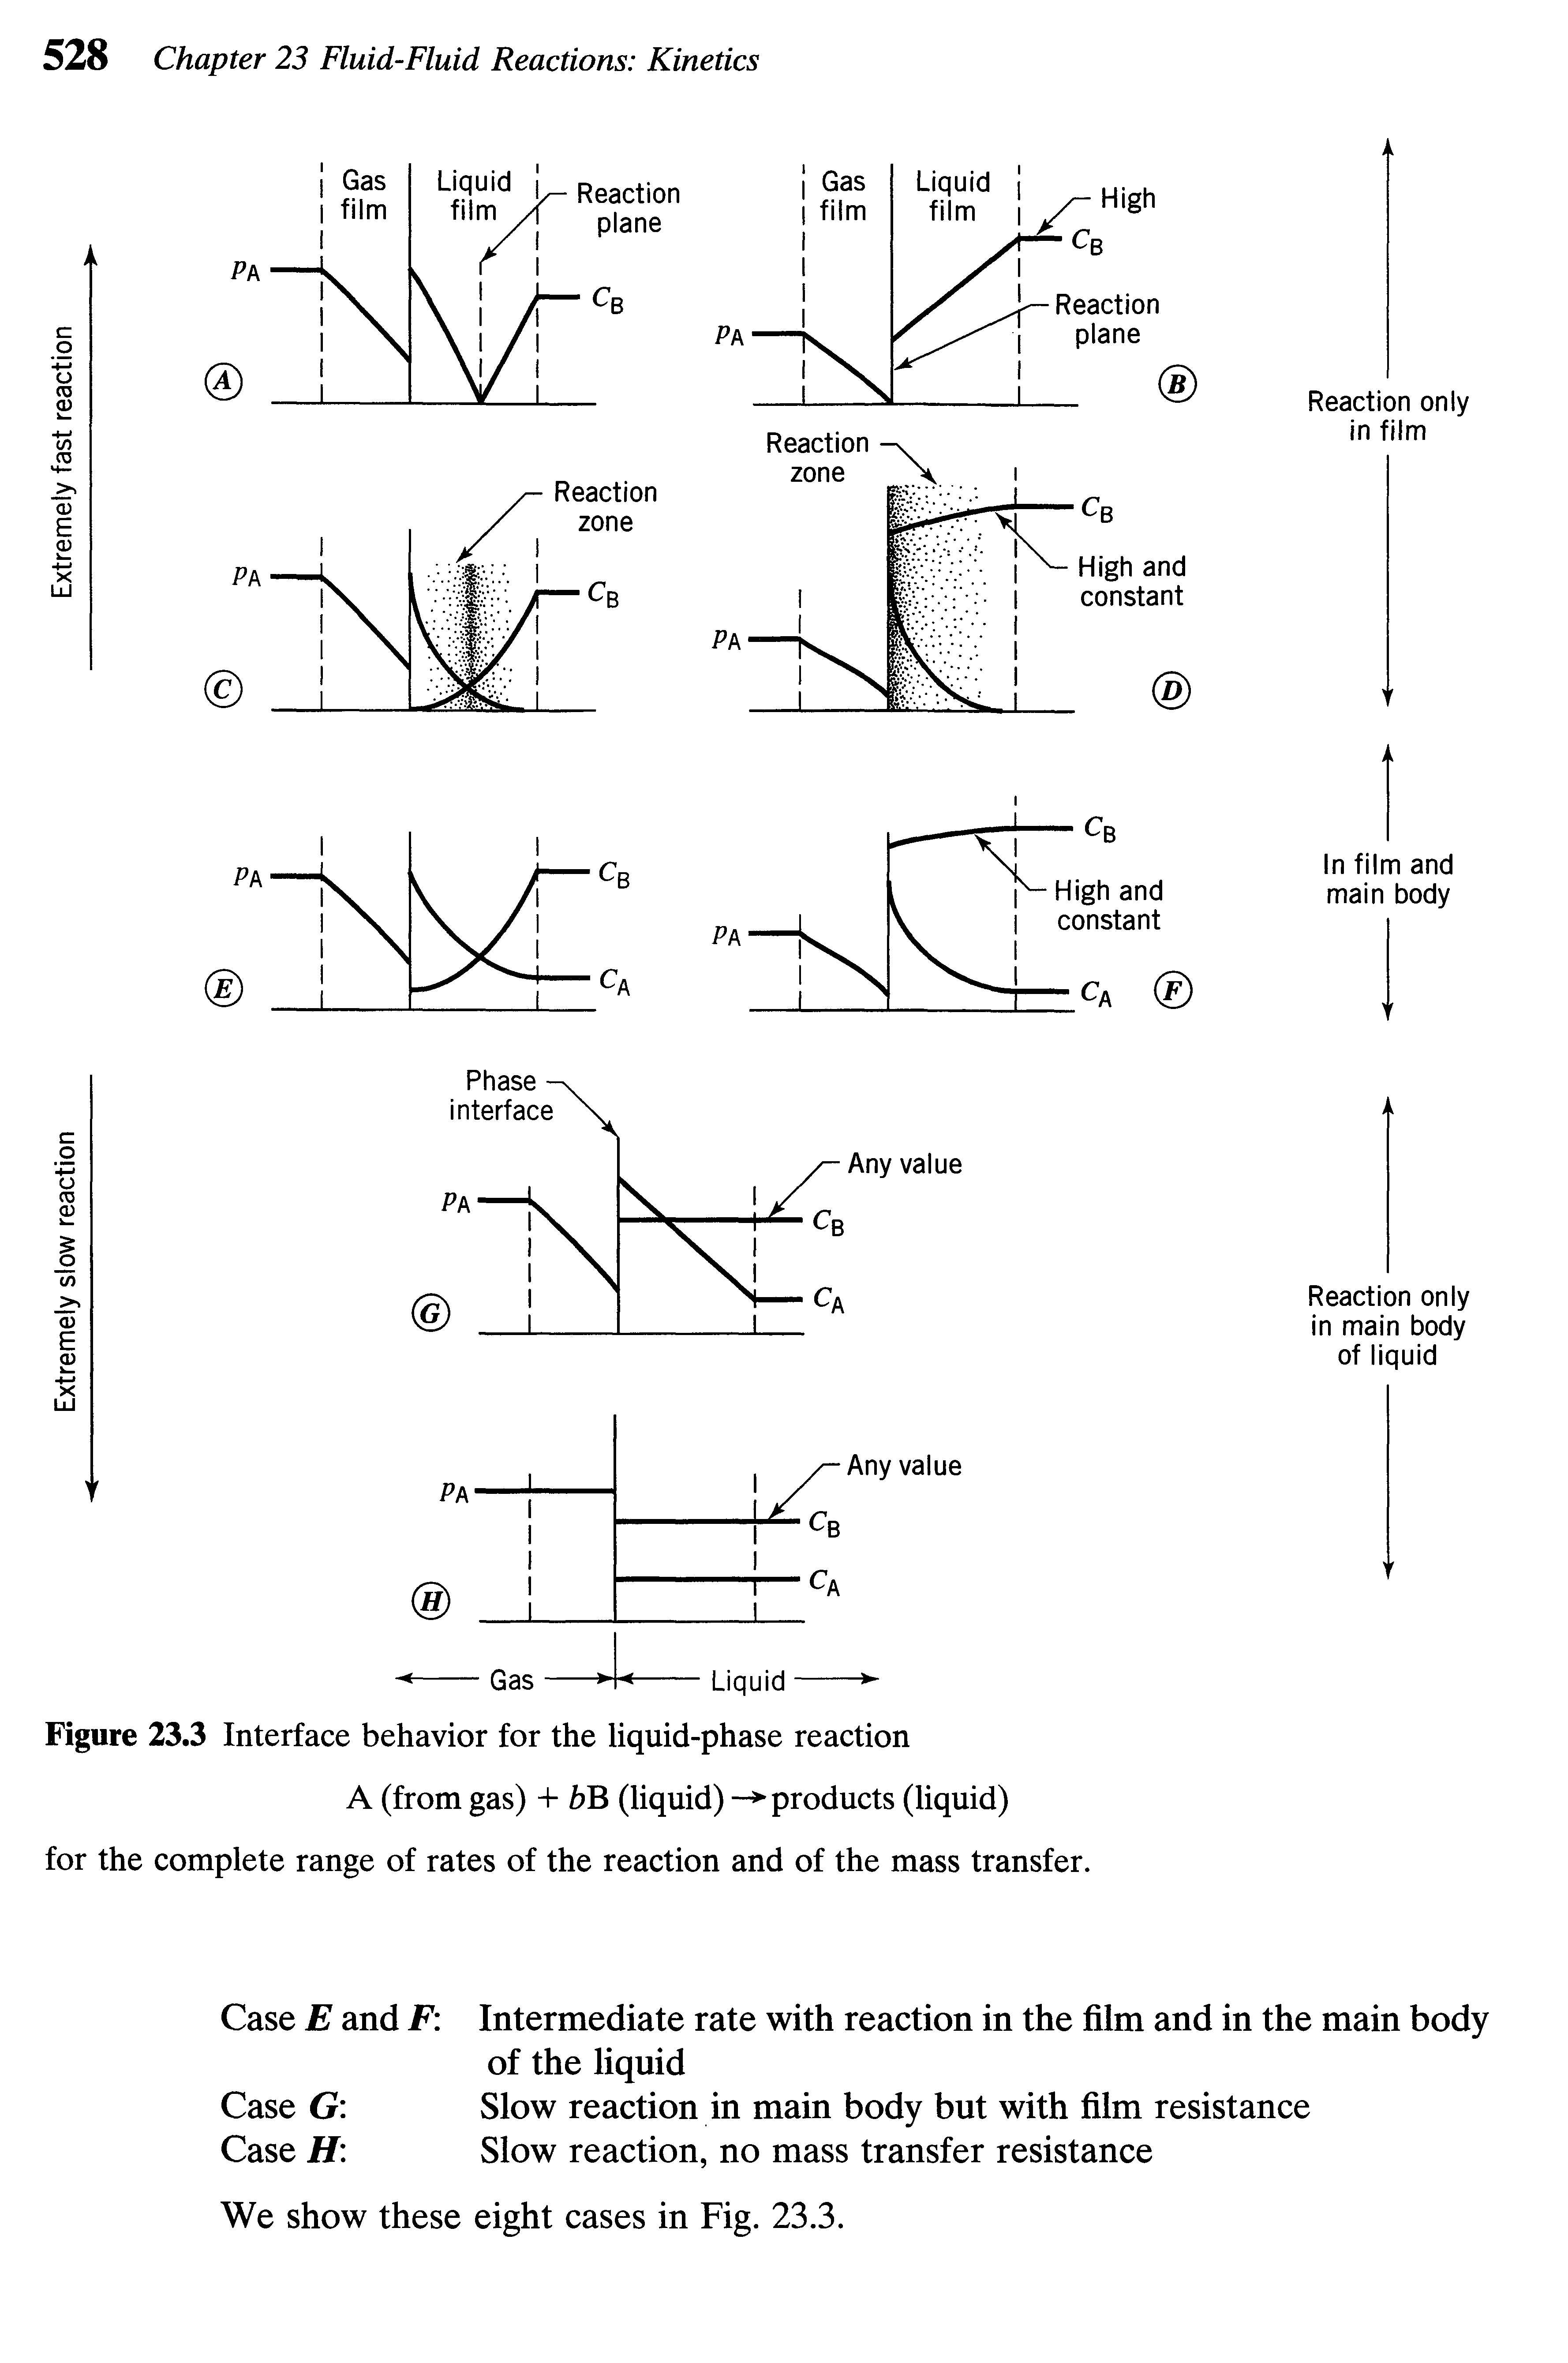 Figure 23.3 Interface behavior for the liquid-phase reaction...